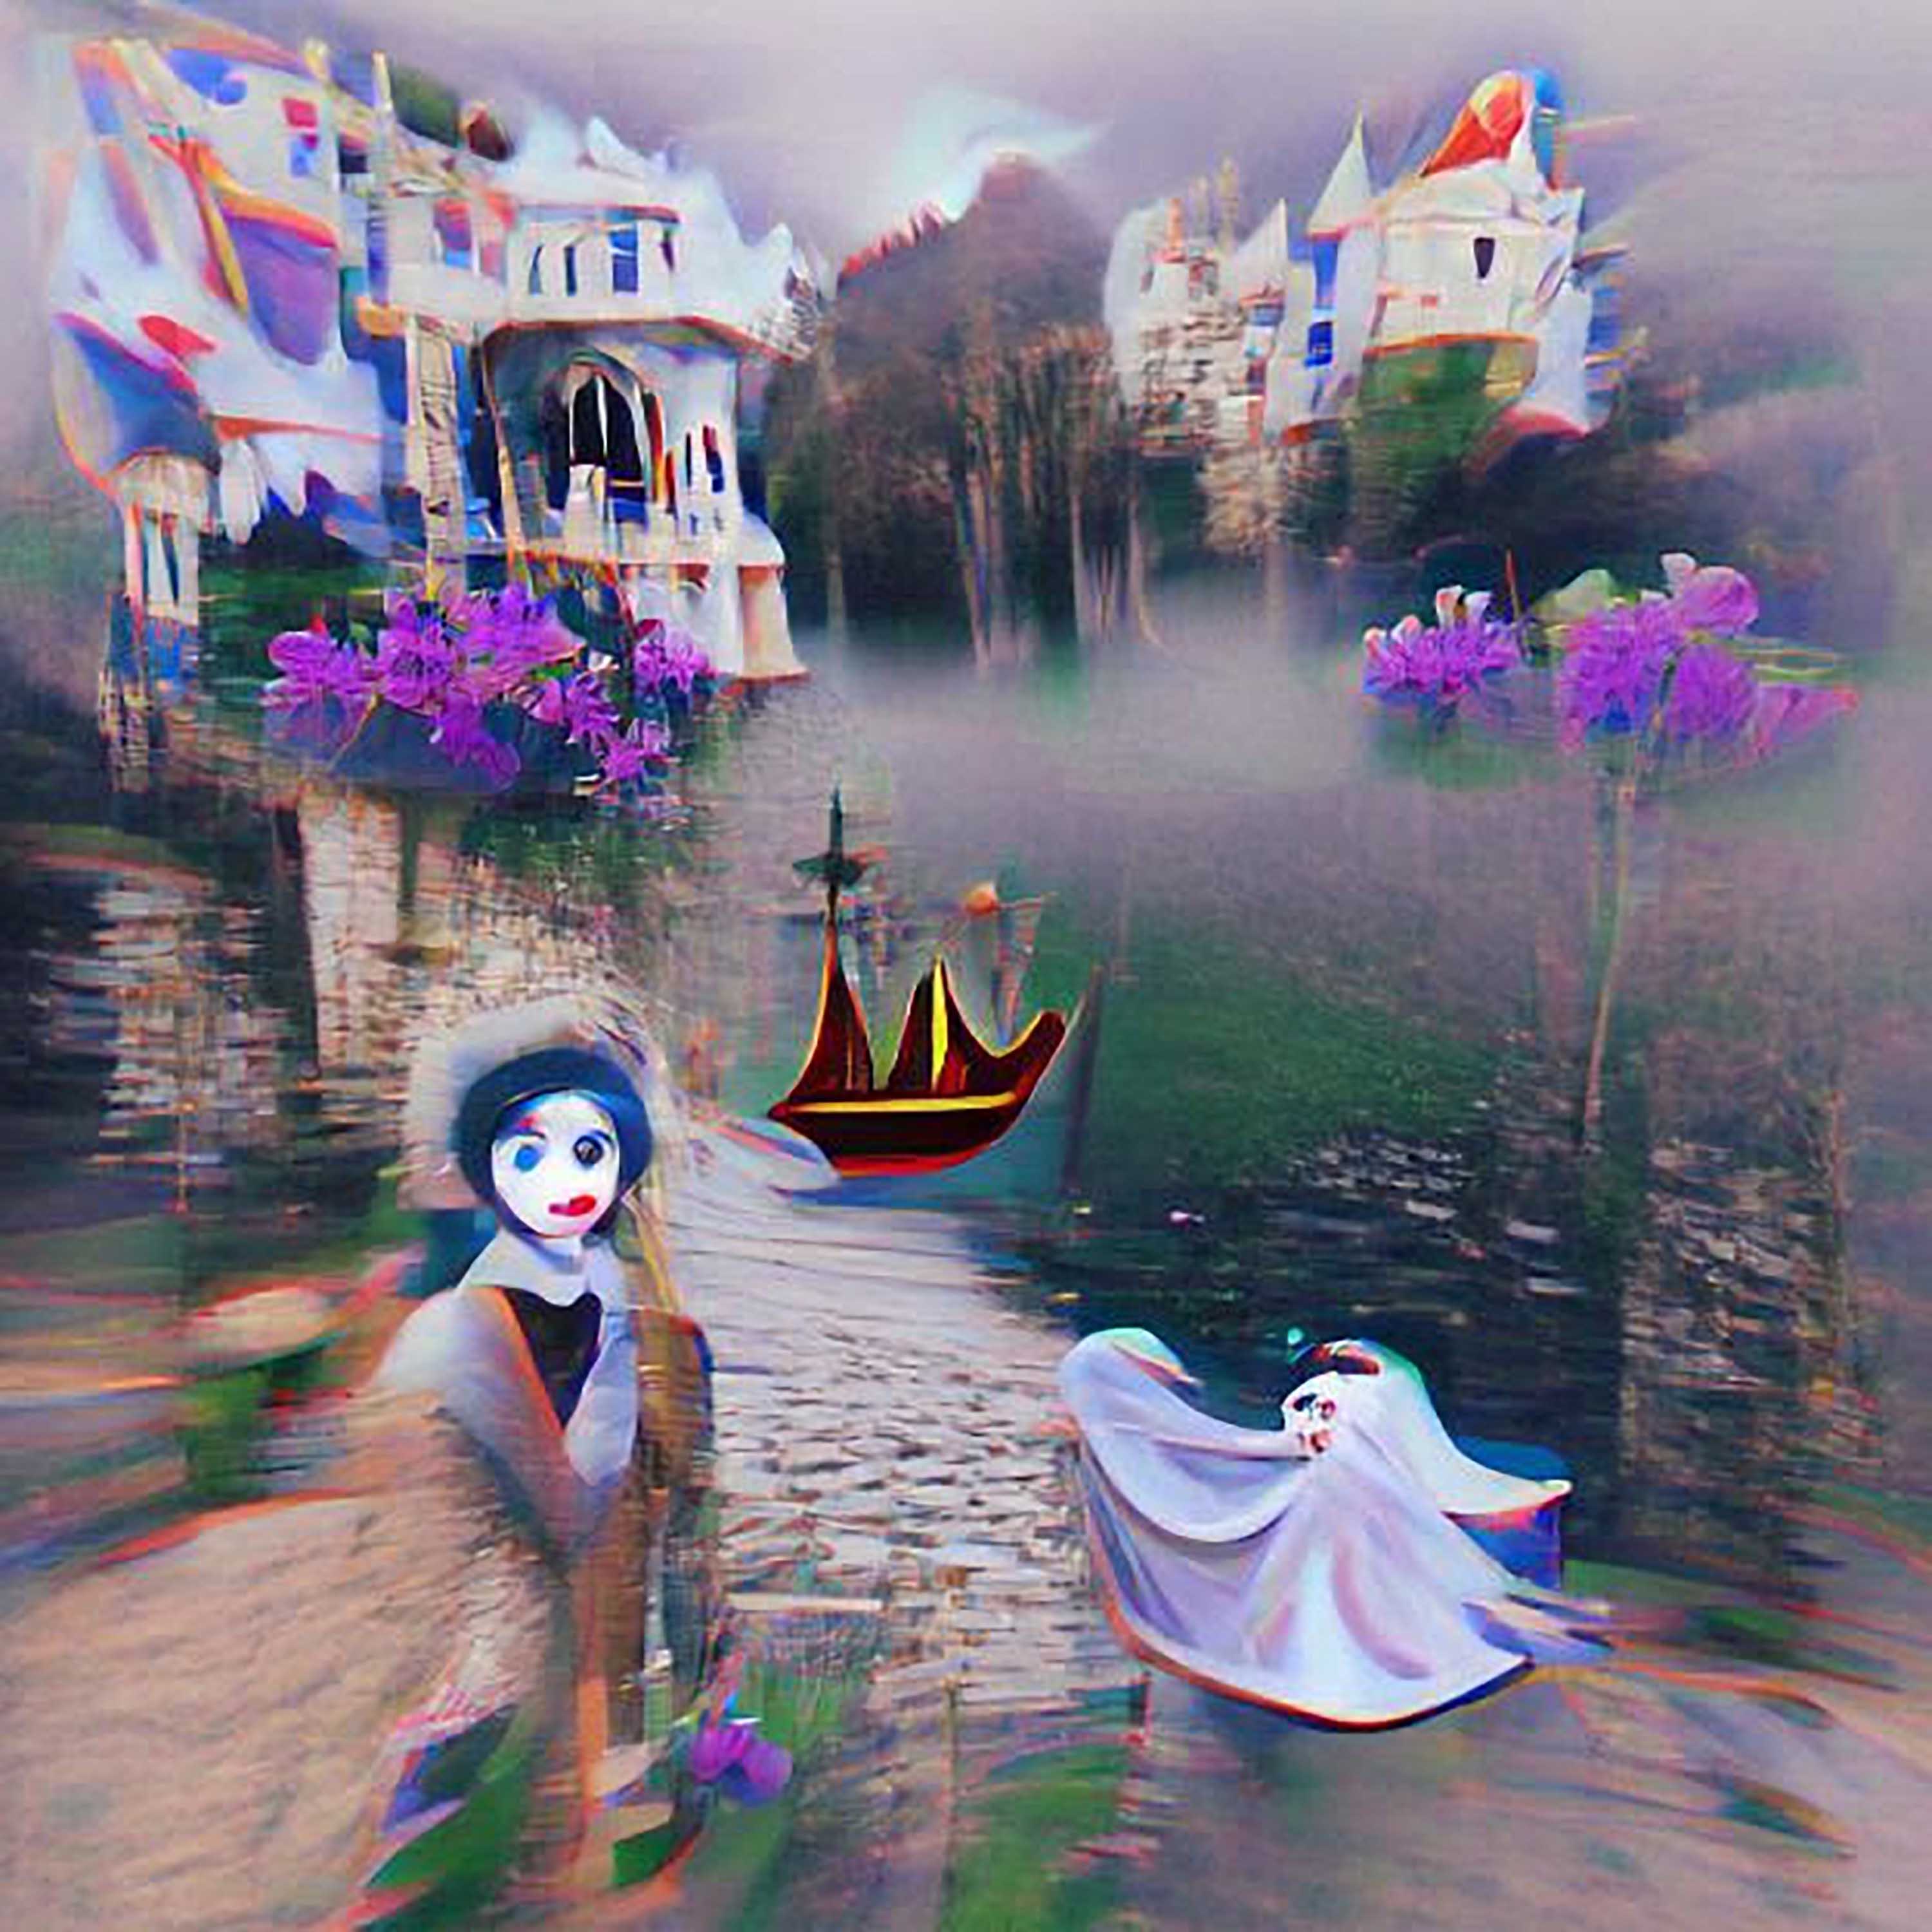 #109 - "The Realm is enchanted in Avalon, I’m EL the Phantom and the Opera is that of a sad Clown singing glad songs, the scent of grass is strong in the air"